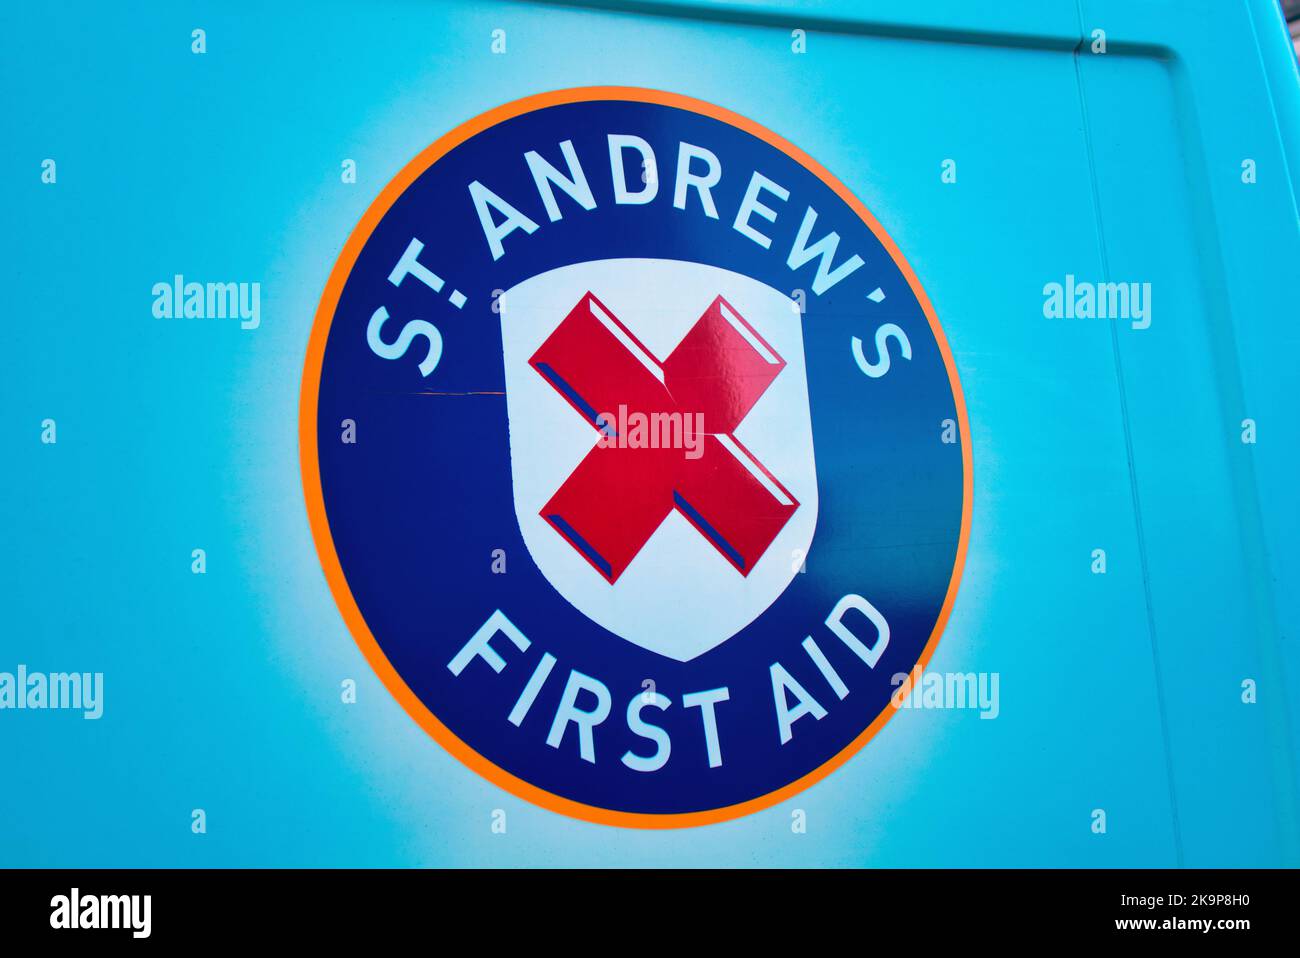 Sr Andrews first aid private medical service business ambulance Stock Photo